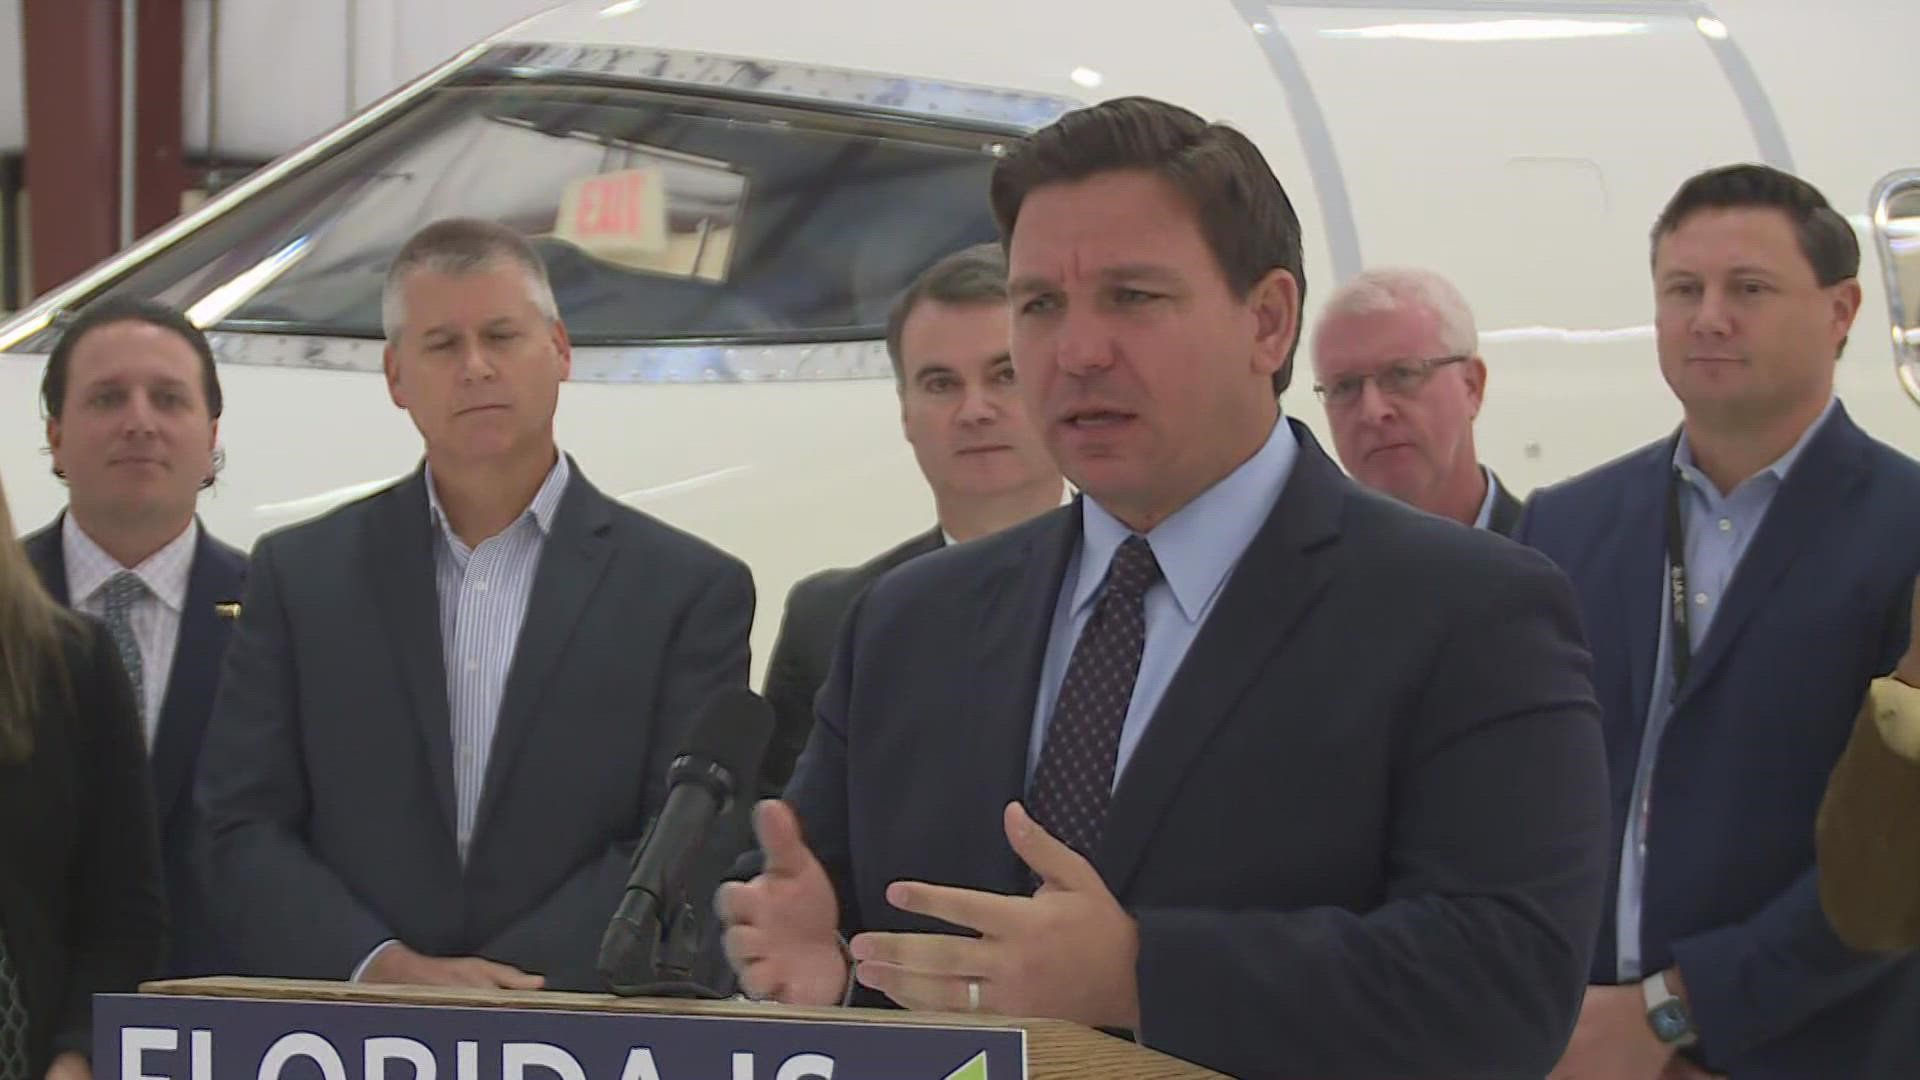 Gov. DeSantis says the man was dumped in the state of Florida.